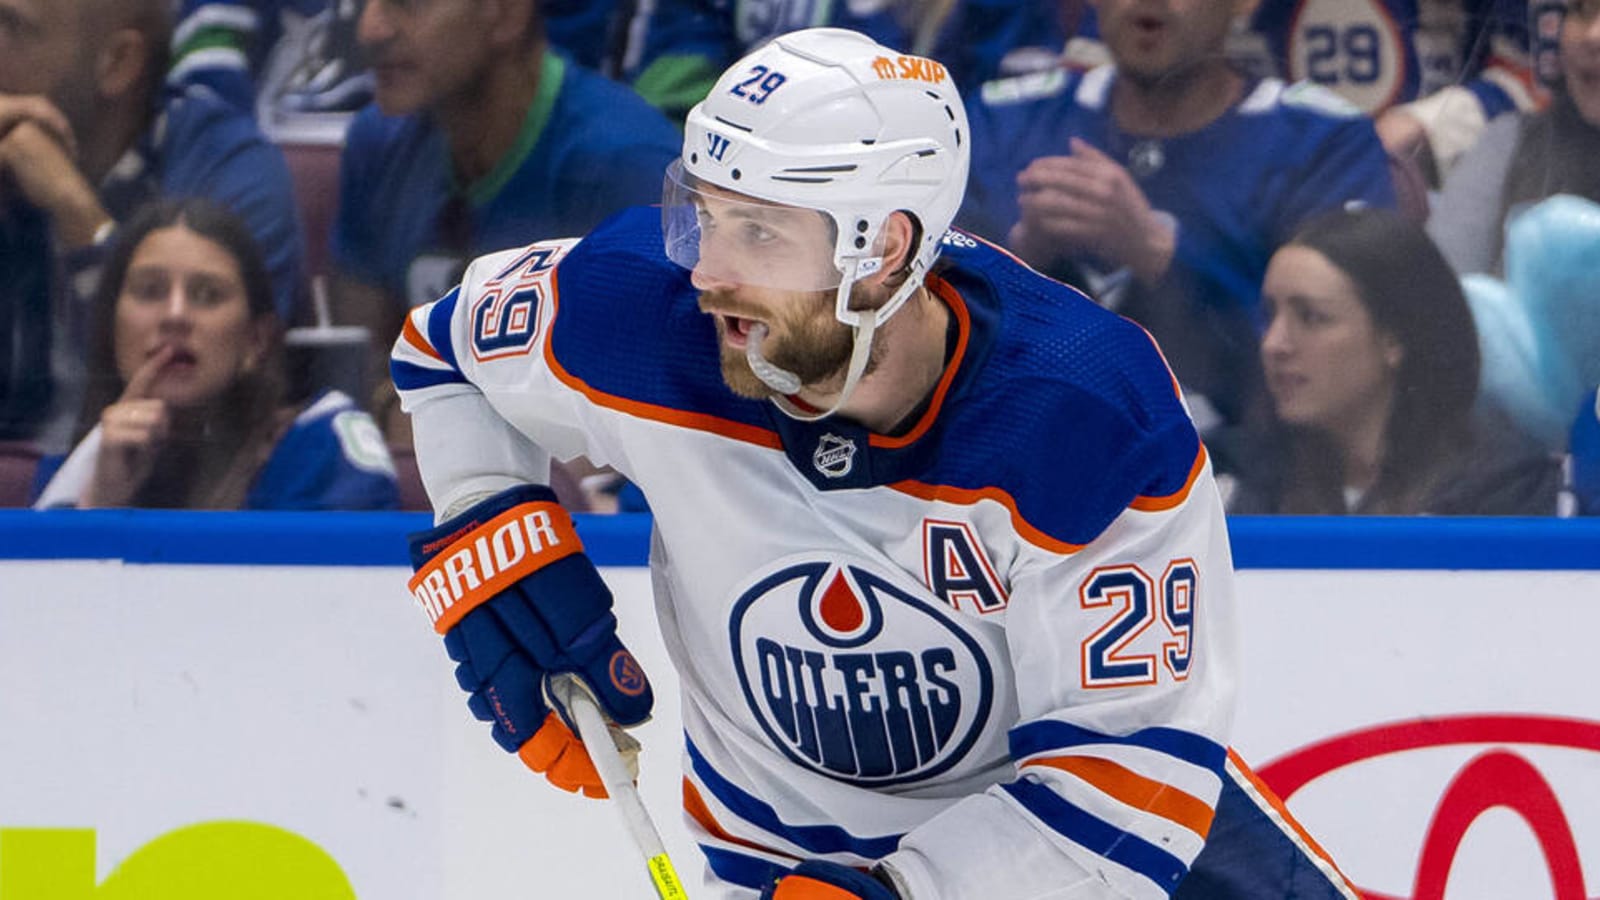 SPECULATION: Would Draisaitl Be Interested in Playing for Sharks?